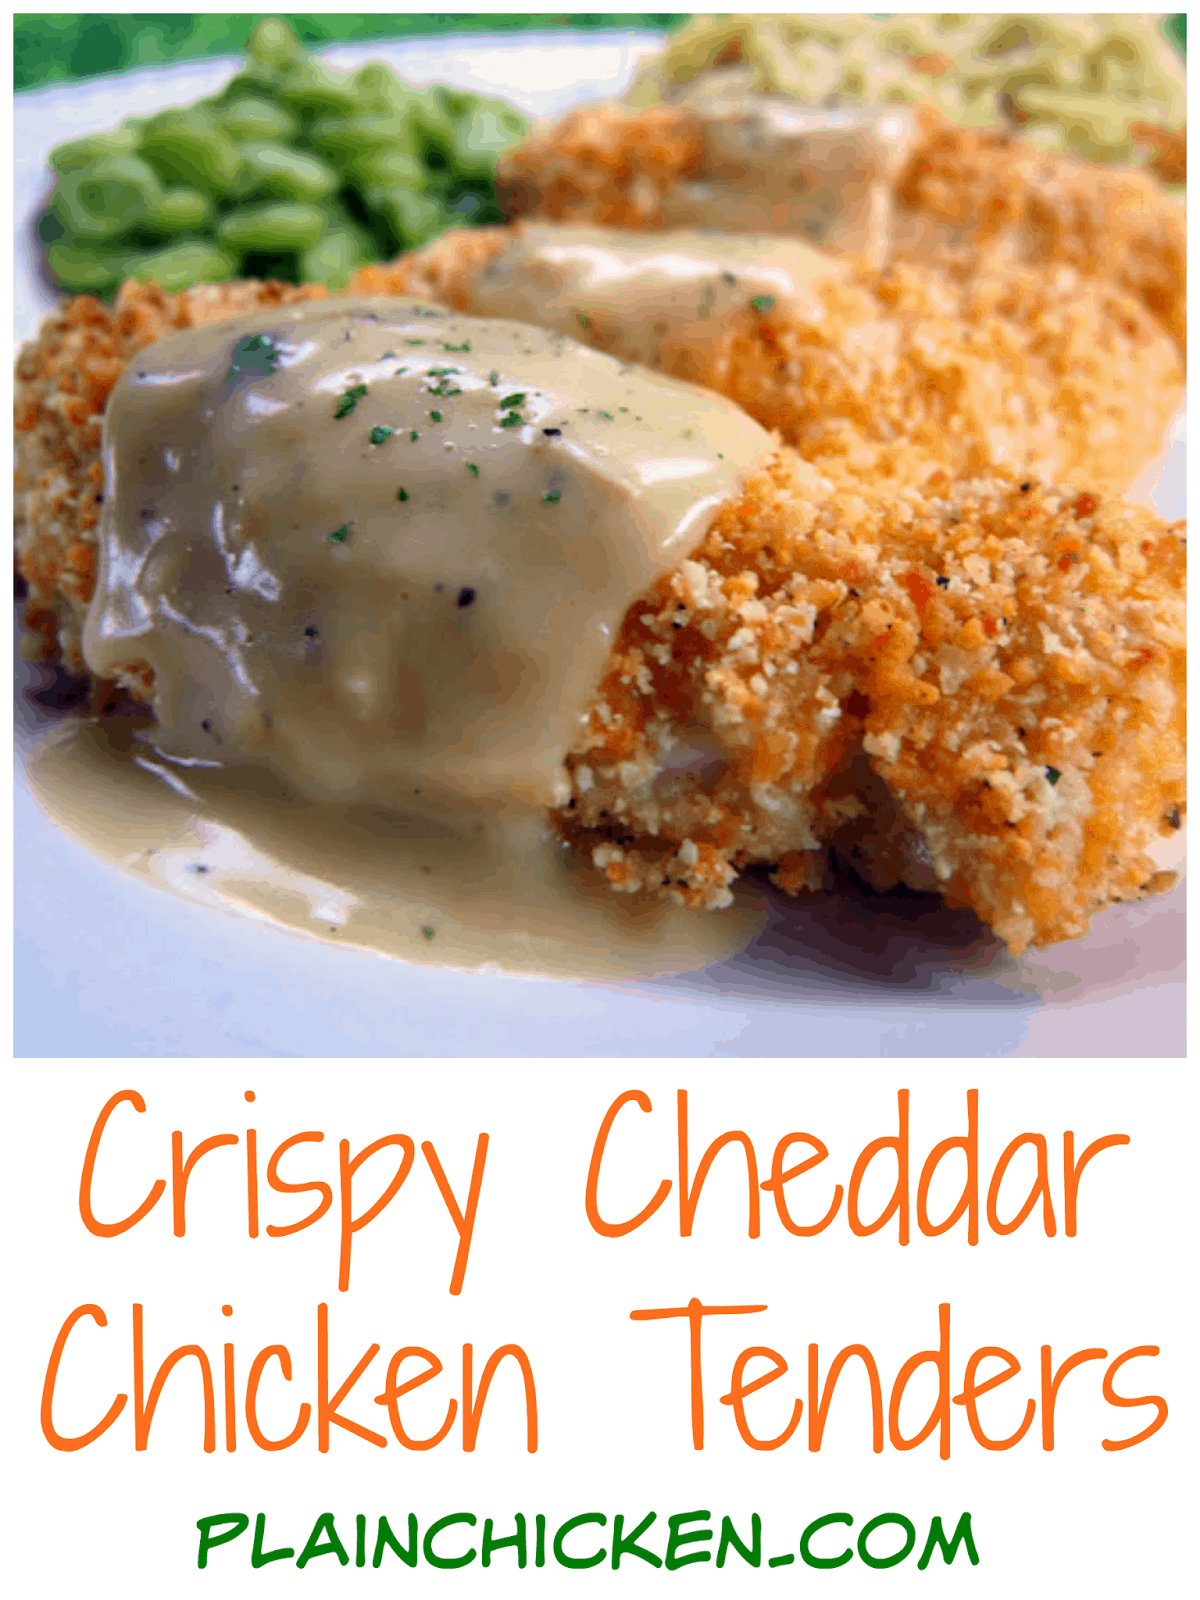 Crispy Cheddar Chicken Tenders Recipe - chicken tenders coated in cheddar, Ranch and Ritz Crackers then baked and topped with a delicious sauce. One of our all-time favorite chicken recipes. Can coat the chicken ahead of time and freeze unbaked for later. Make sauce while tenders bake. Quick and easy weeknight meal!